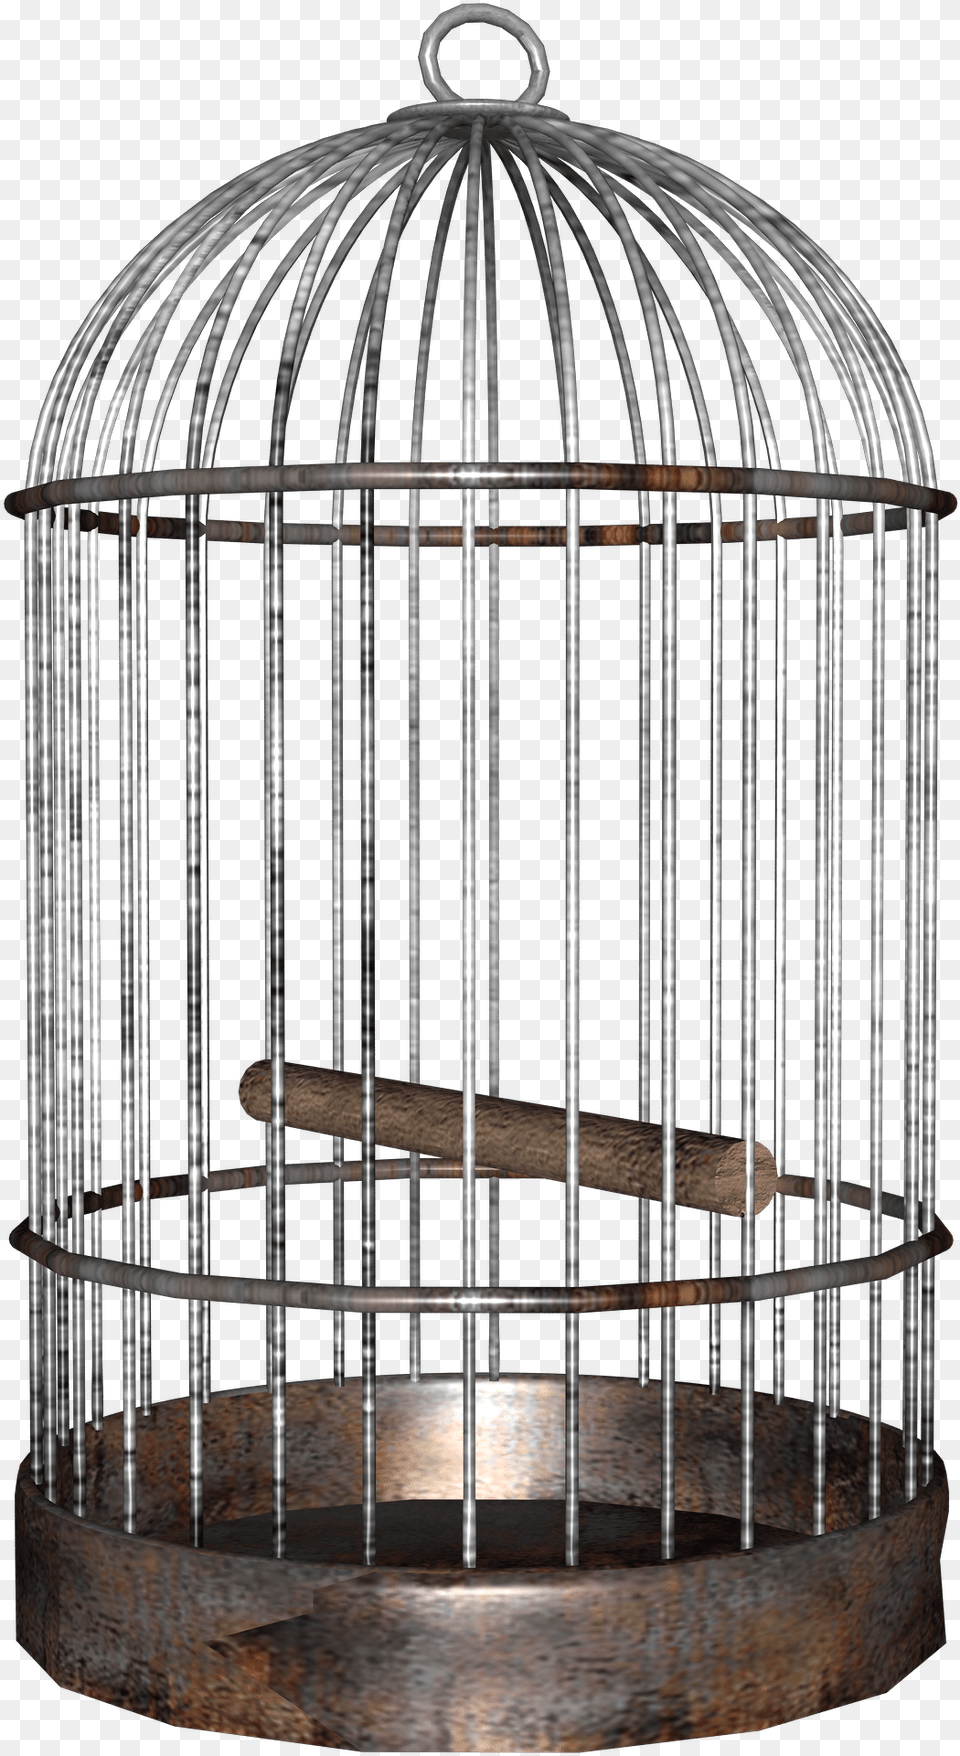 Bird Cage Image Birdcage Free Png Download